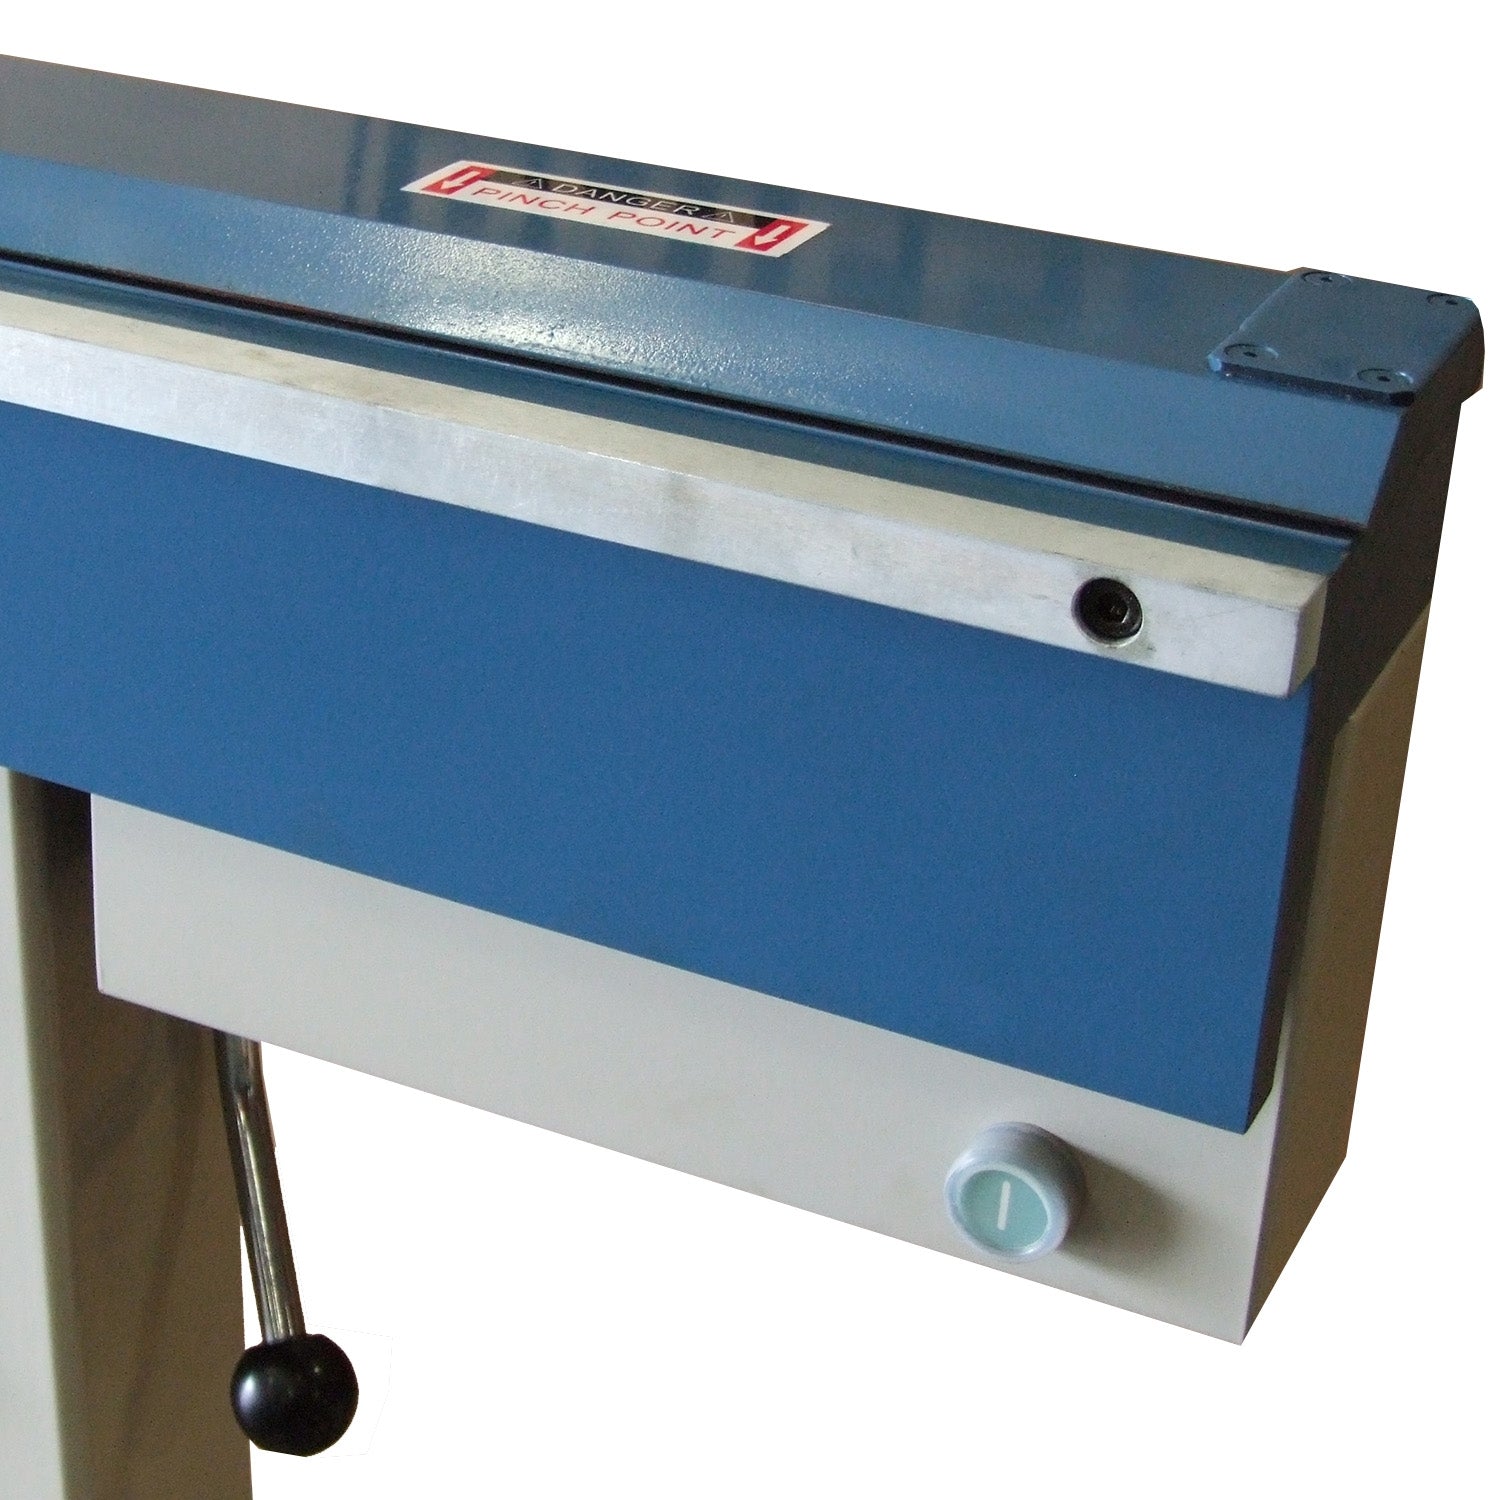 Baileigh BB-7216M 220V(+/- 5 percent) 1 Phase Manually Operated Magnetic Sheet Metal Brake, 6' Length